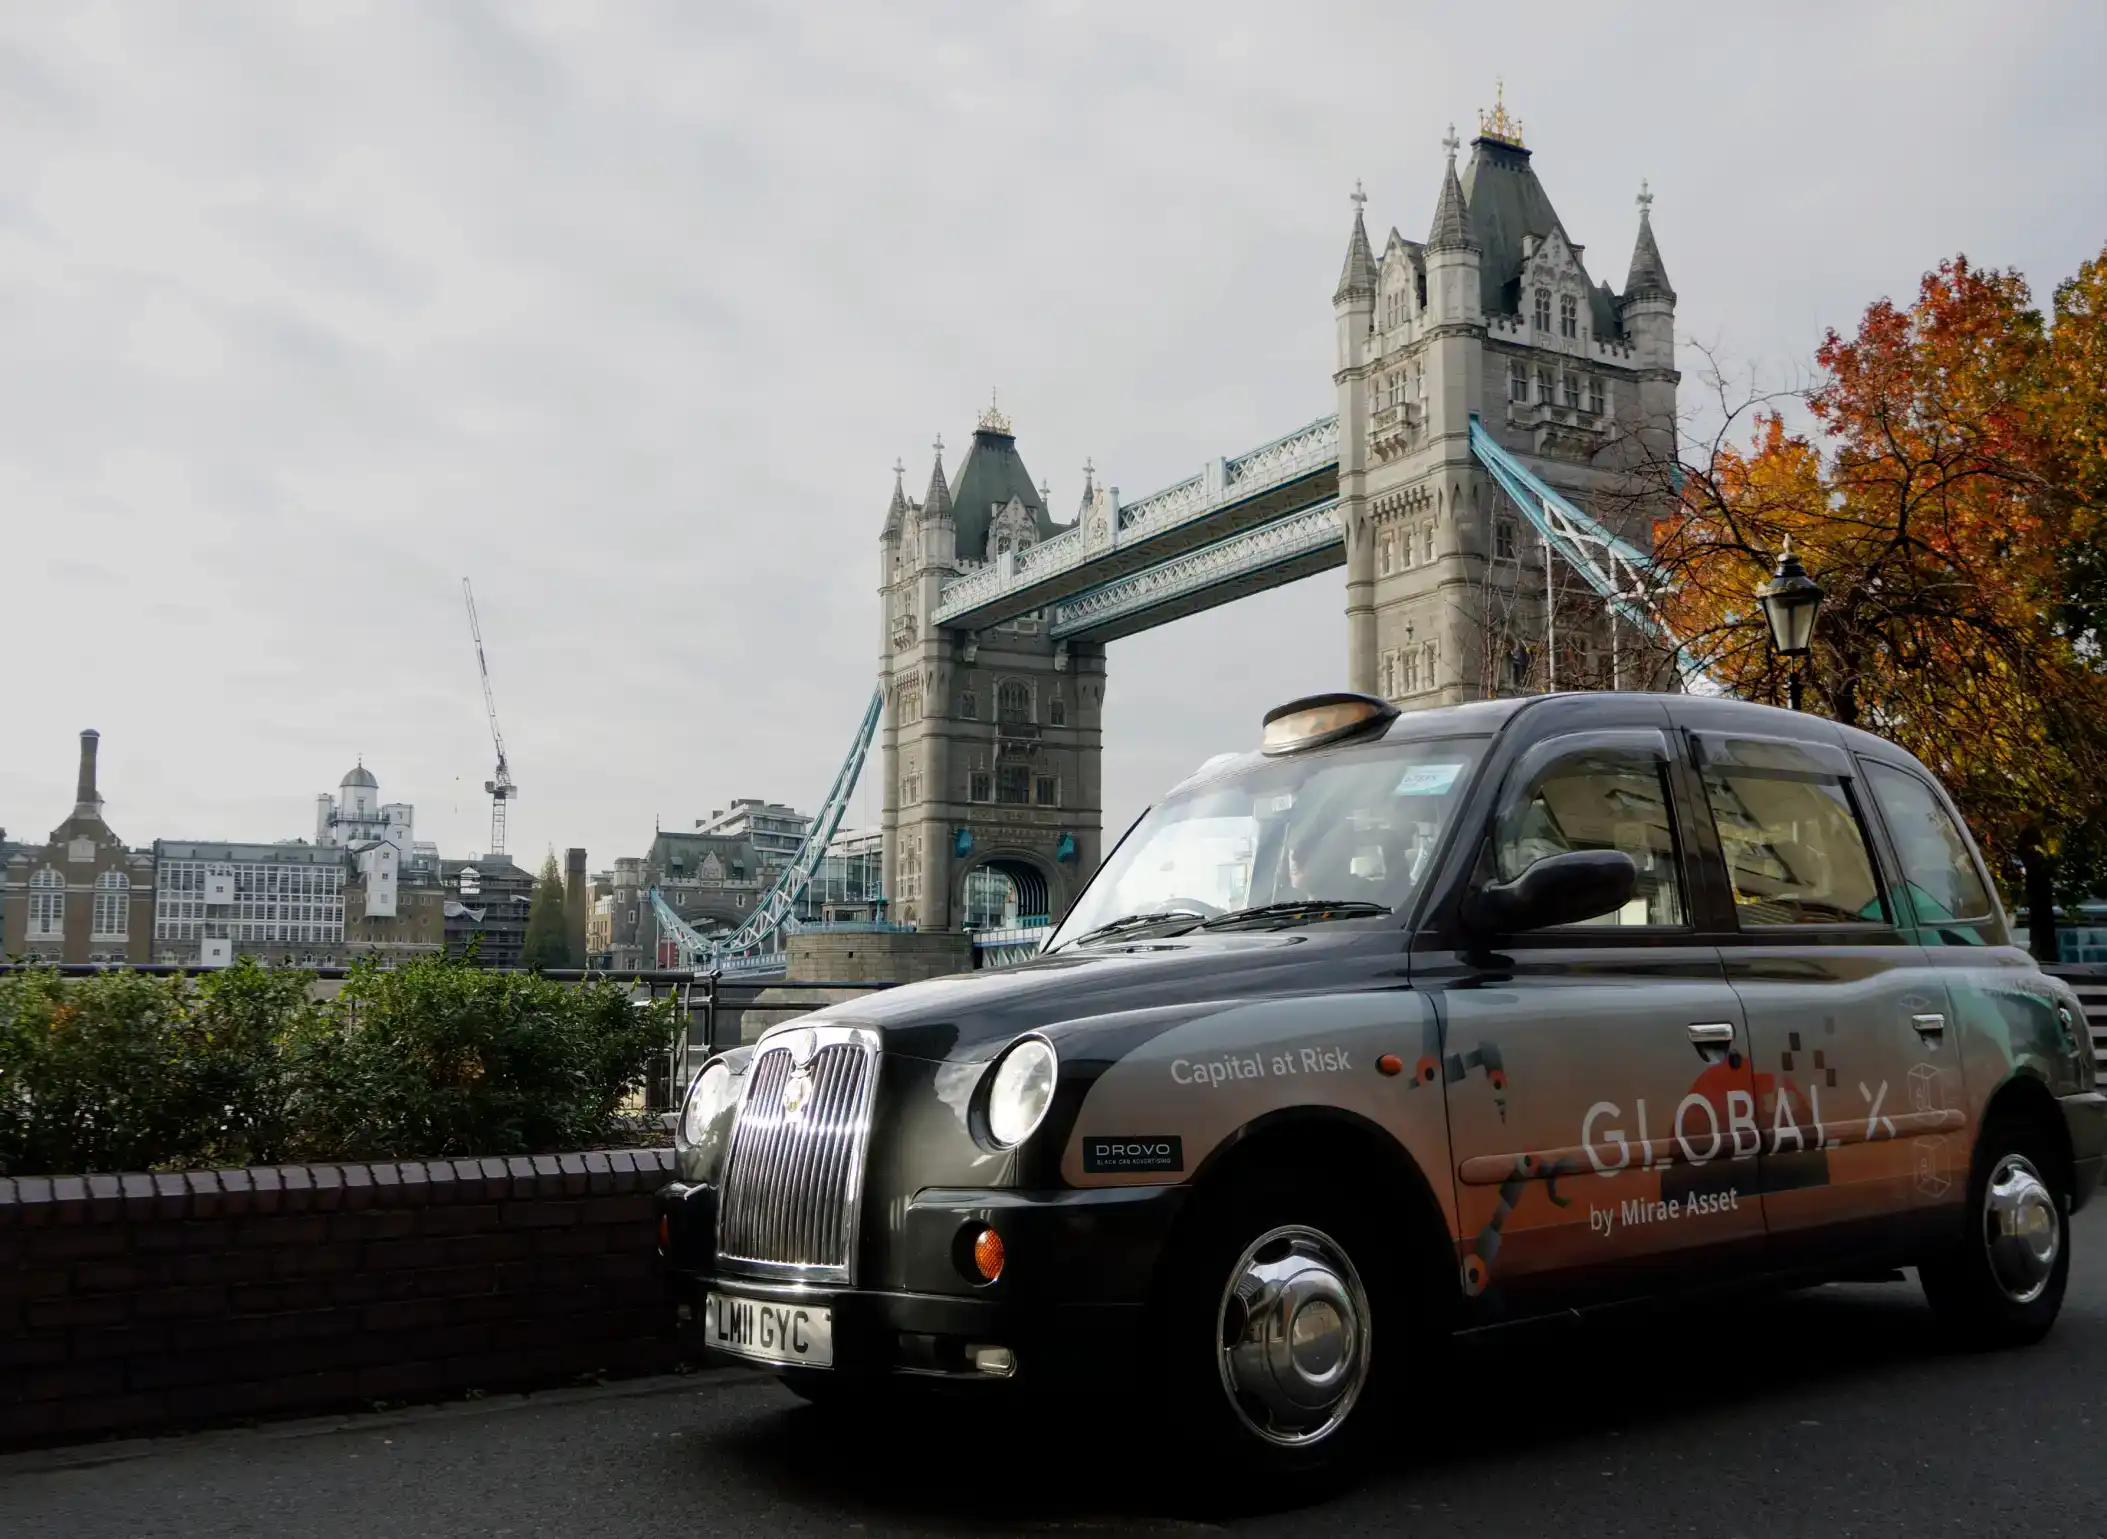 Global X Taxi Advertising